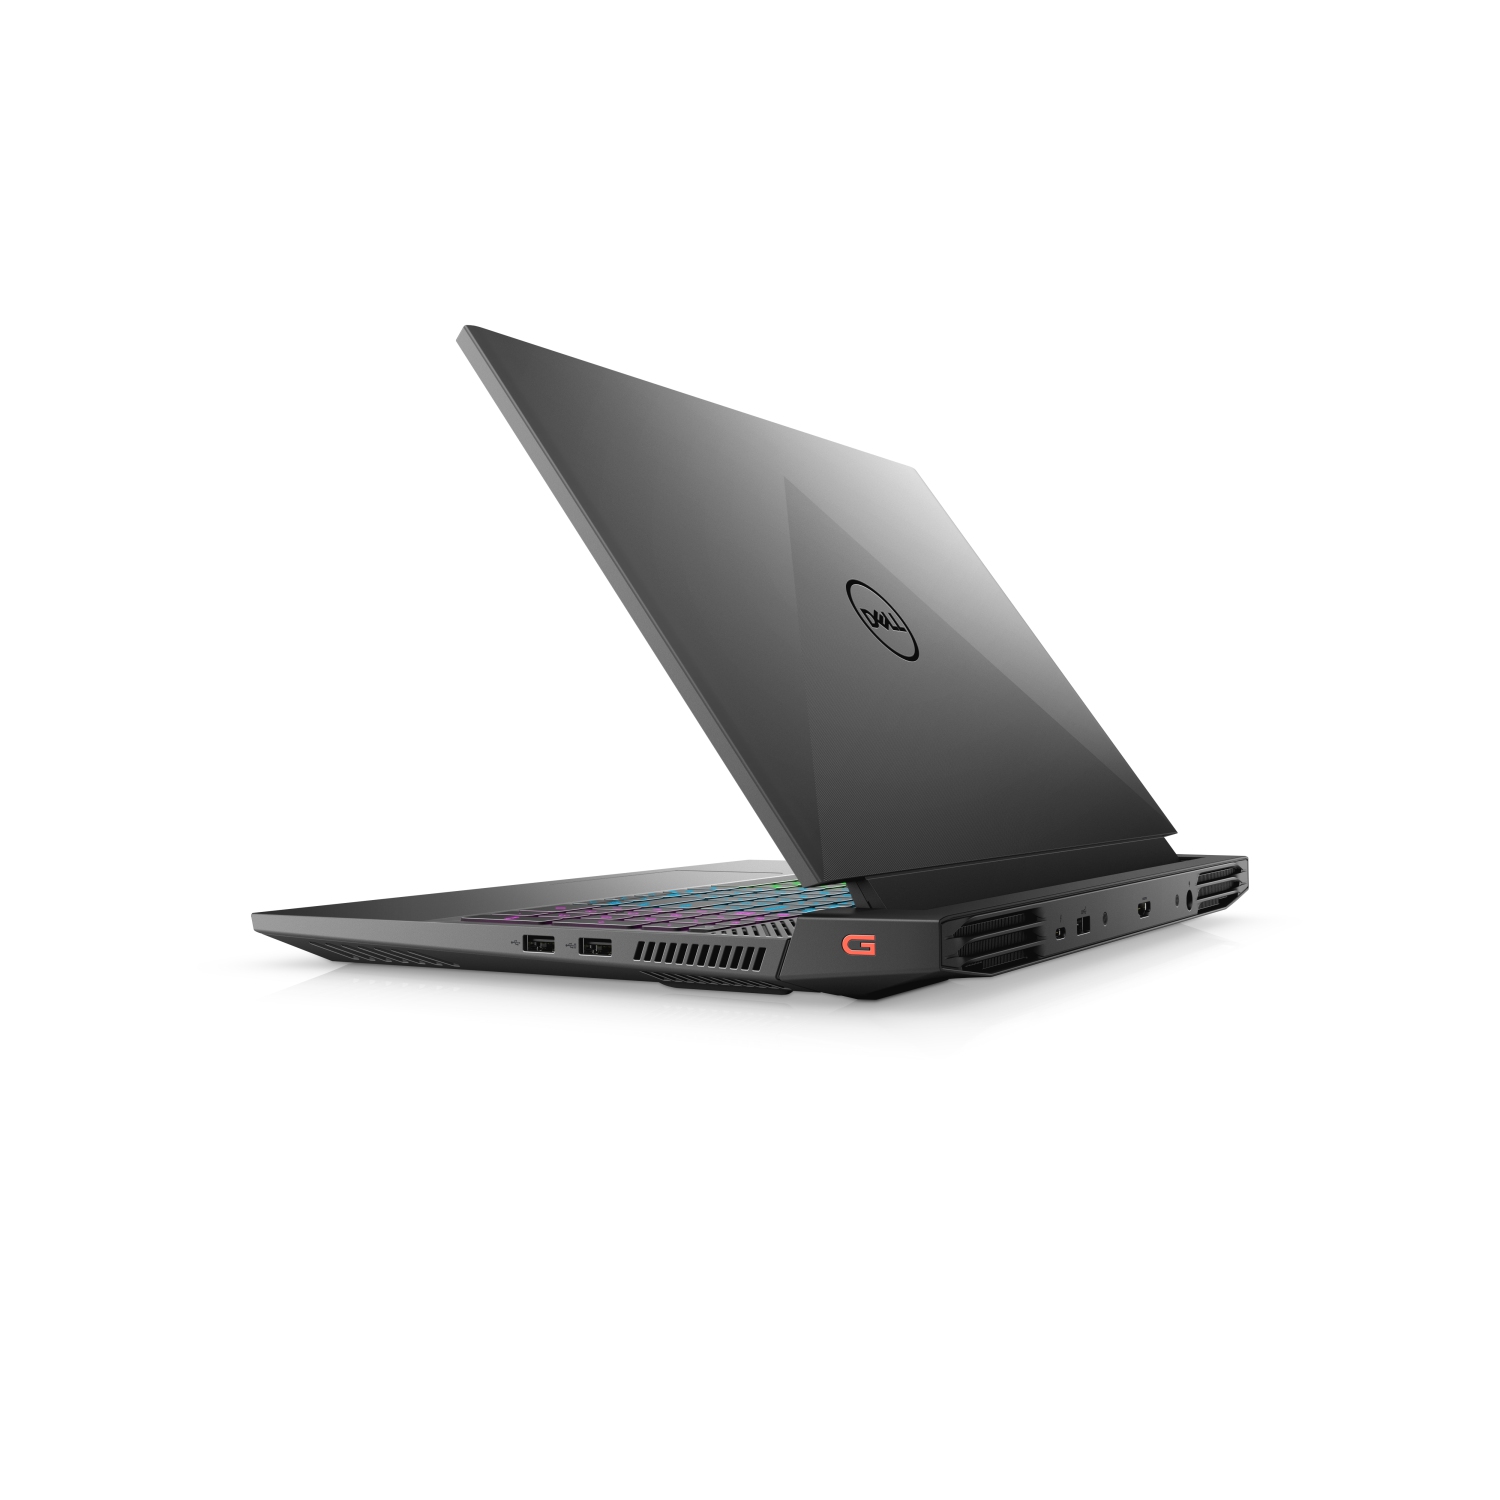 Refurbished (Excellent) – Dell G15 5511 Gaming Laptop (2021) | 15.6" FHD | Core i5 - 512GB SSD - 8GB RAM - RTX 3050 | 6 Cores @ 4.4 GHz - 11th Gen CPU